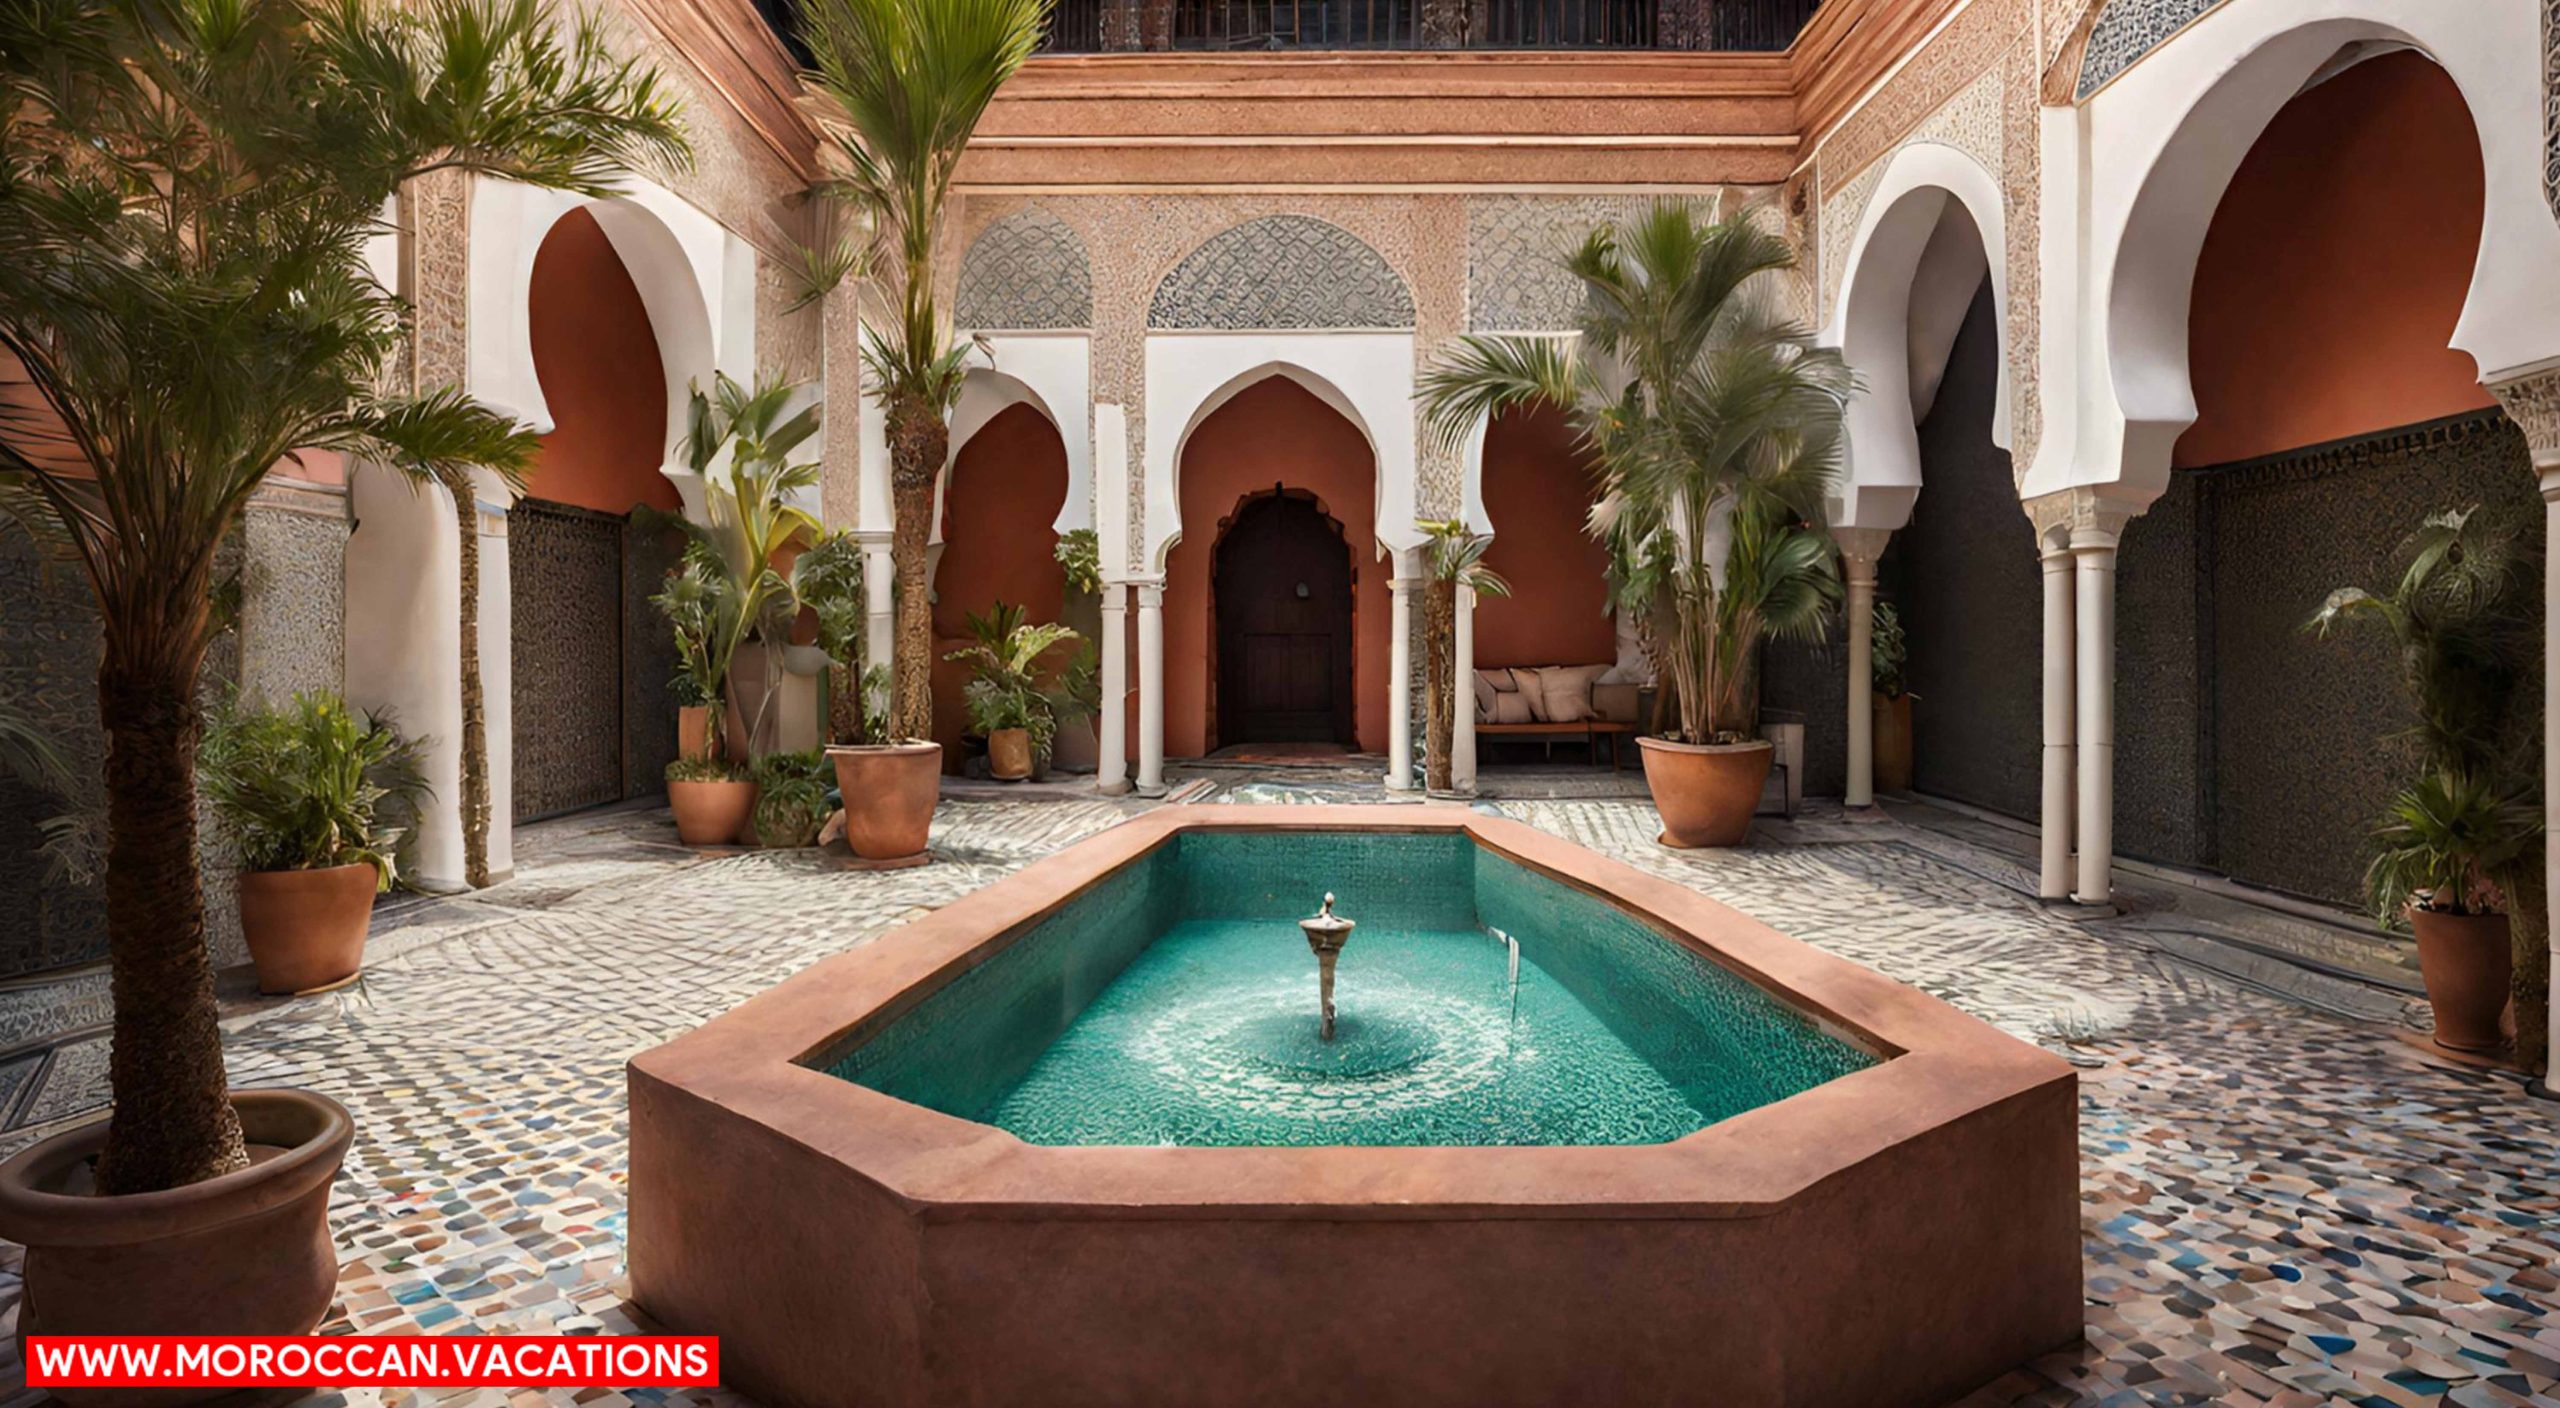 A traditional Marrakesh riad adorned with intricate zellige tiles.